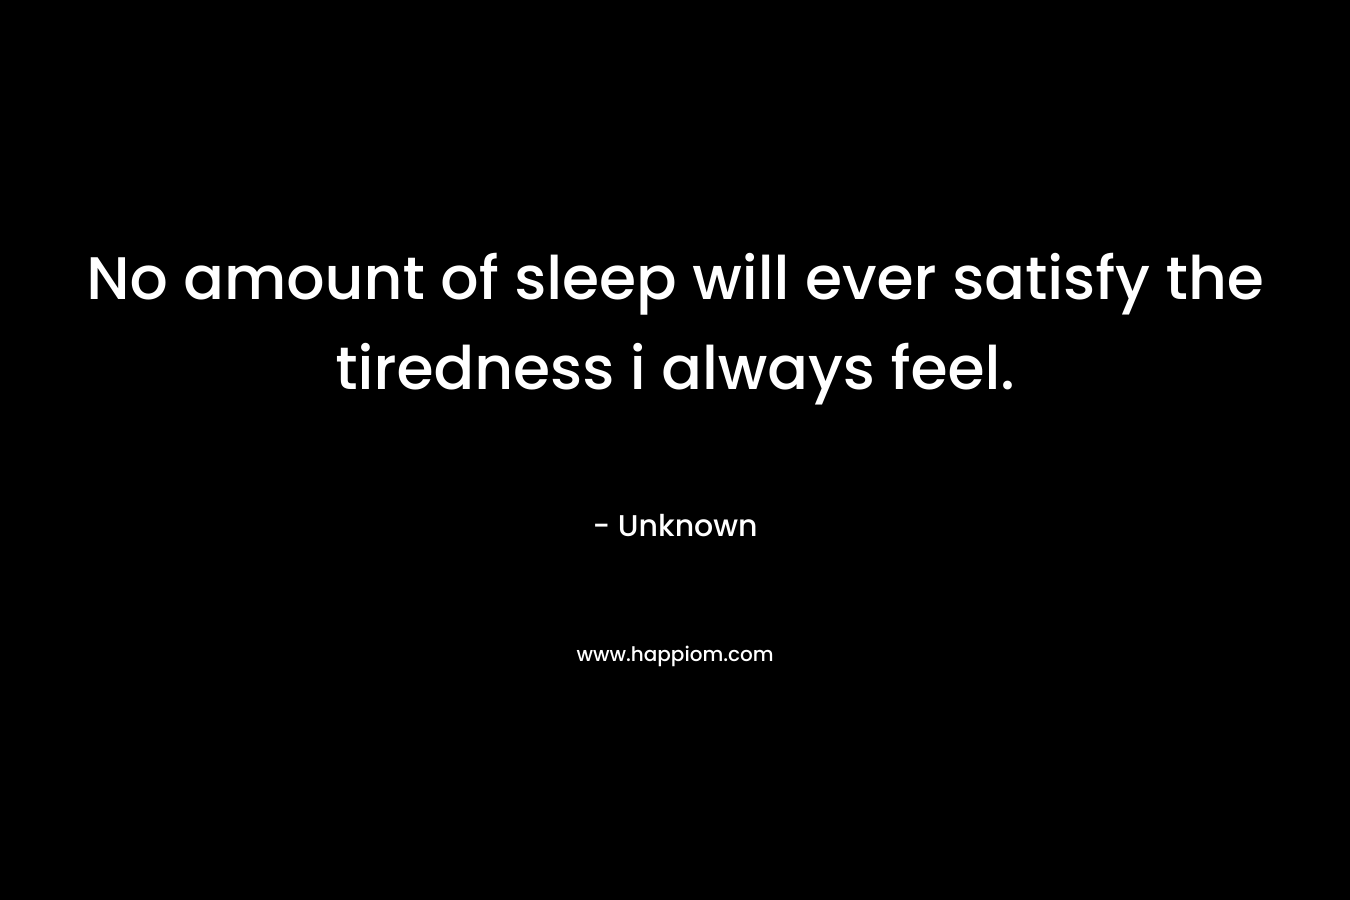 No amount of sleep will ever satisfy the tiredness i always feel. – Unknown